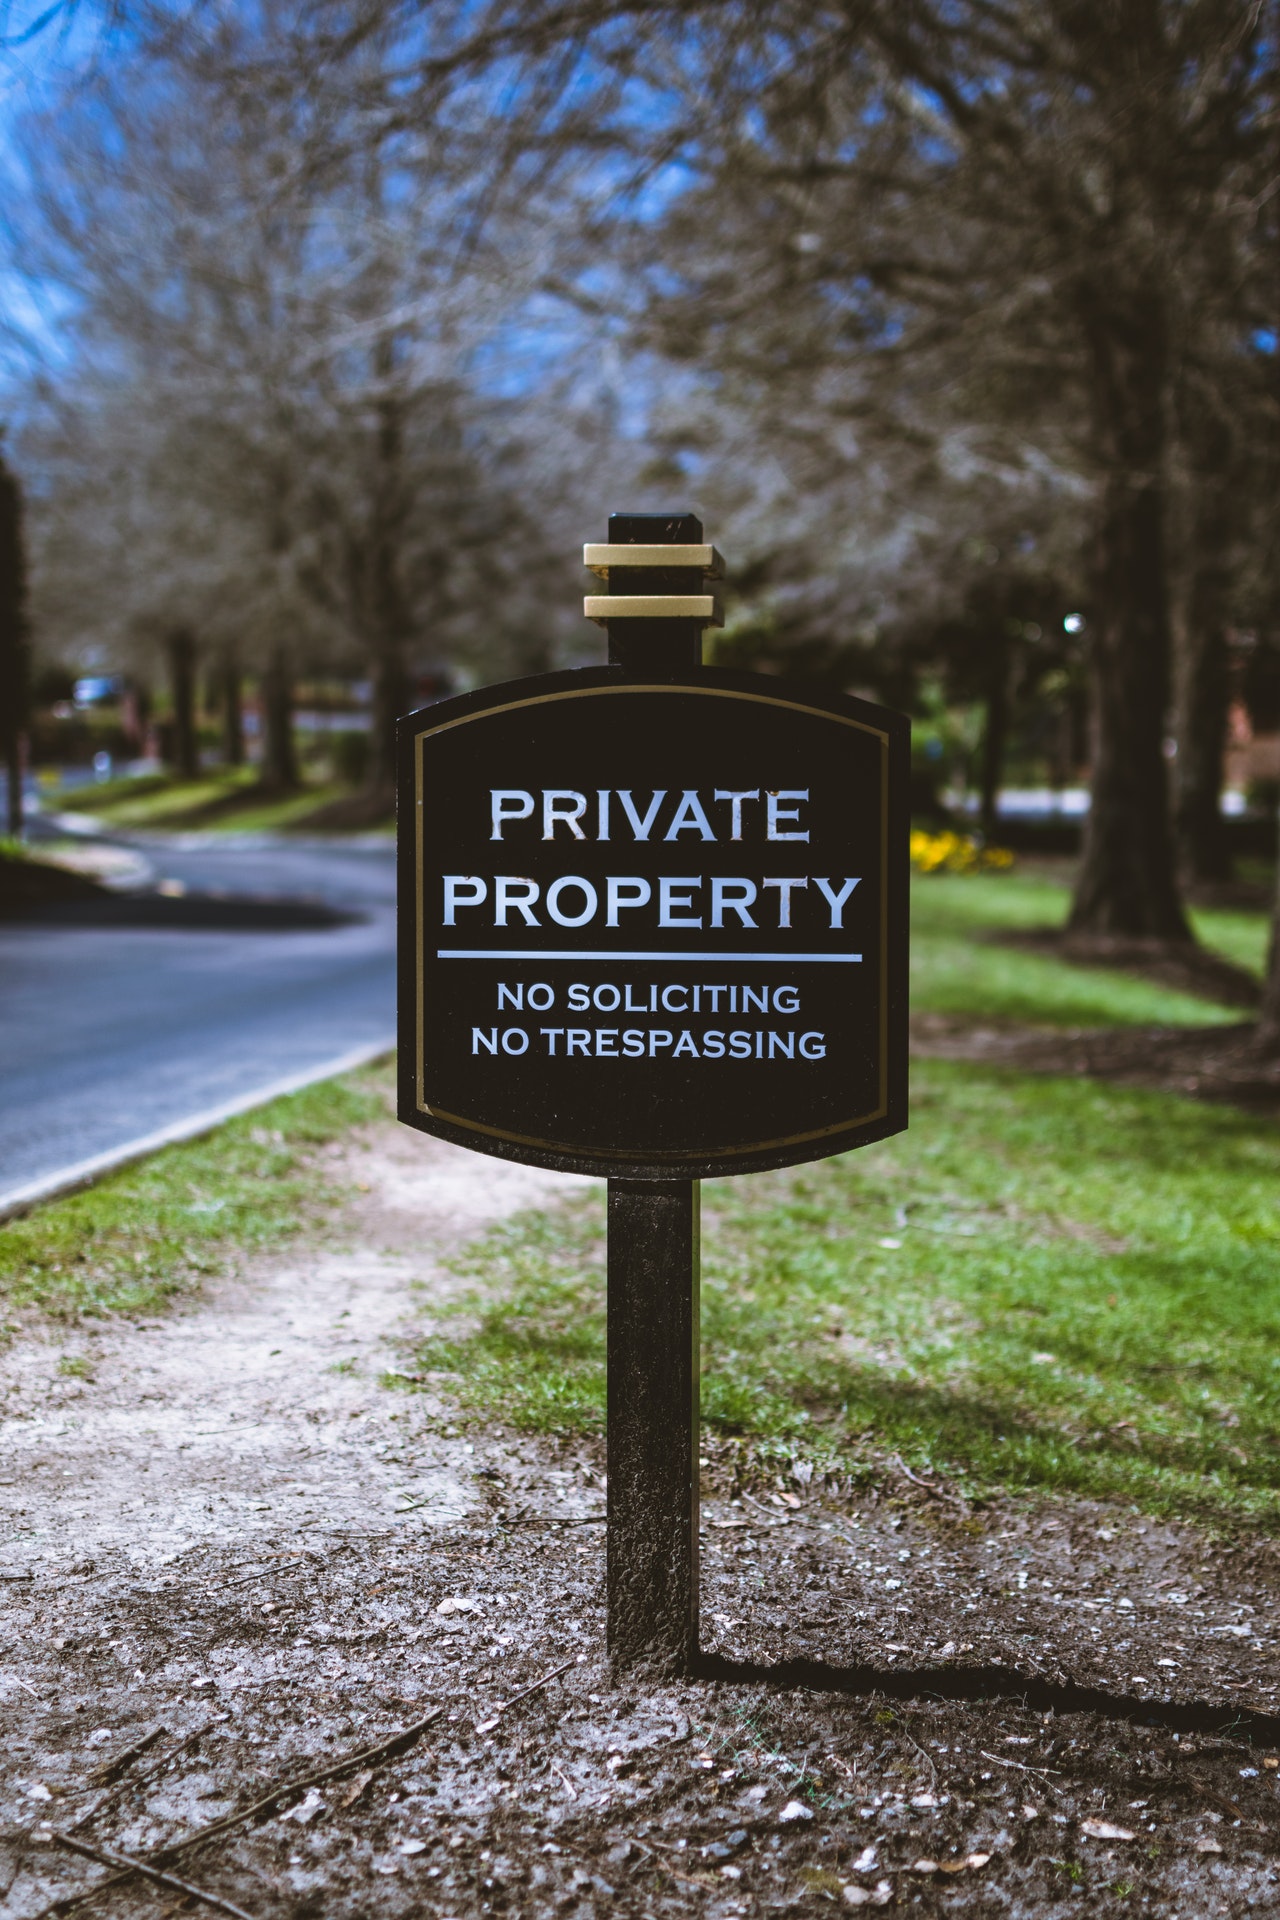 A sign in front of someone's yard that says "Private Property: No soliciting or tresspassing"